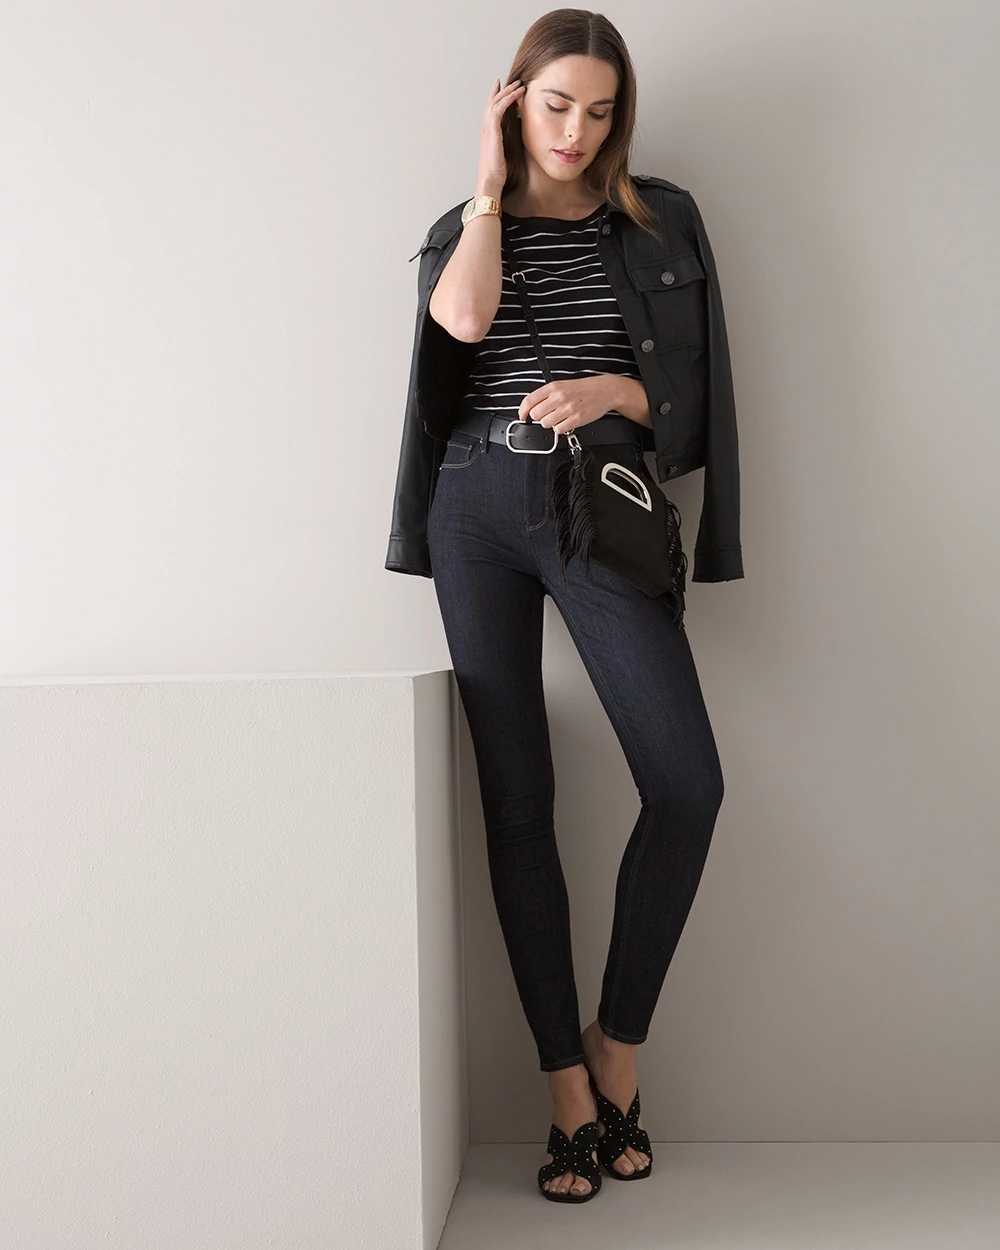 High-Rise Sculpt Skinny Ankle Jeans